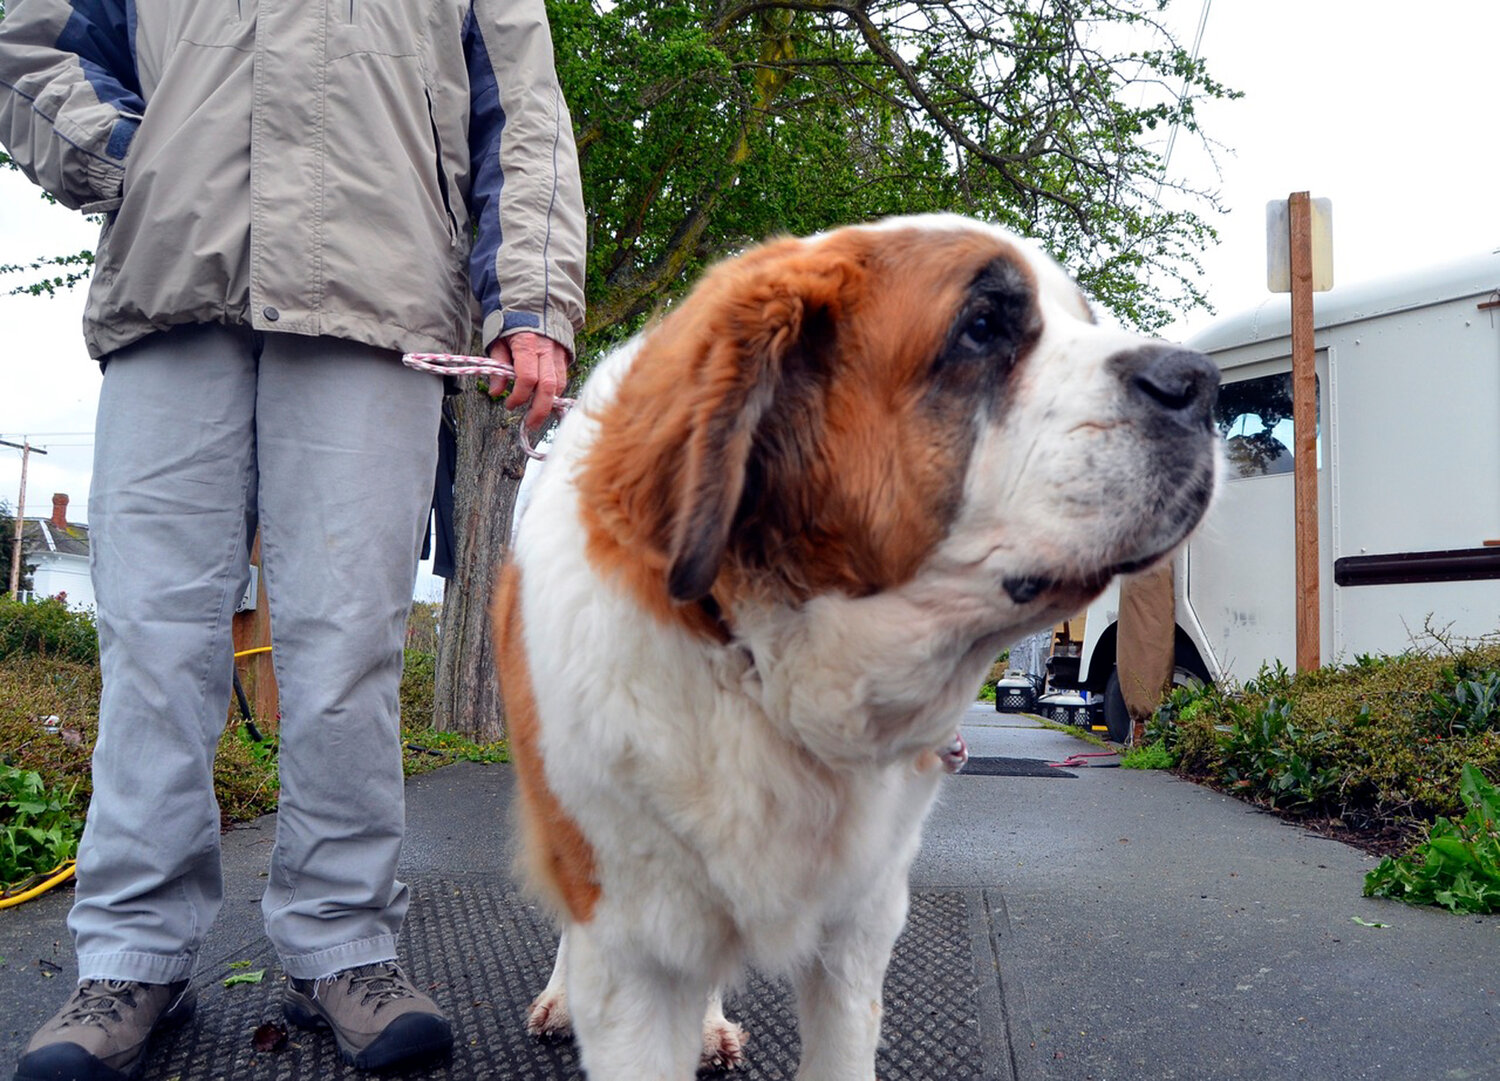 A dog tours the Chimacum Farmers Market with its person.